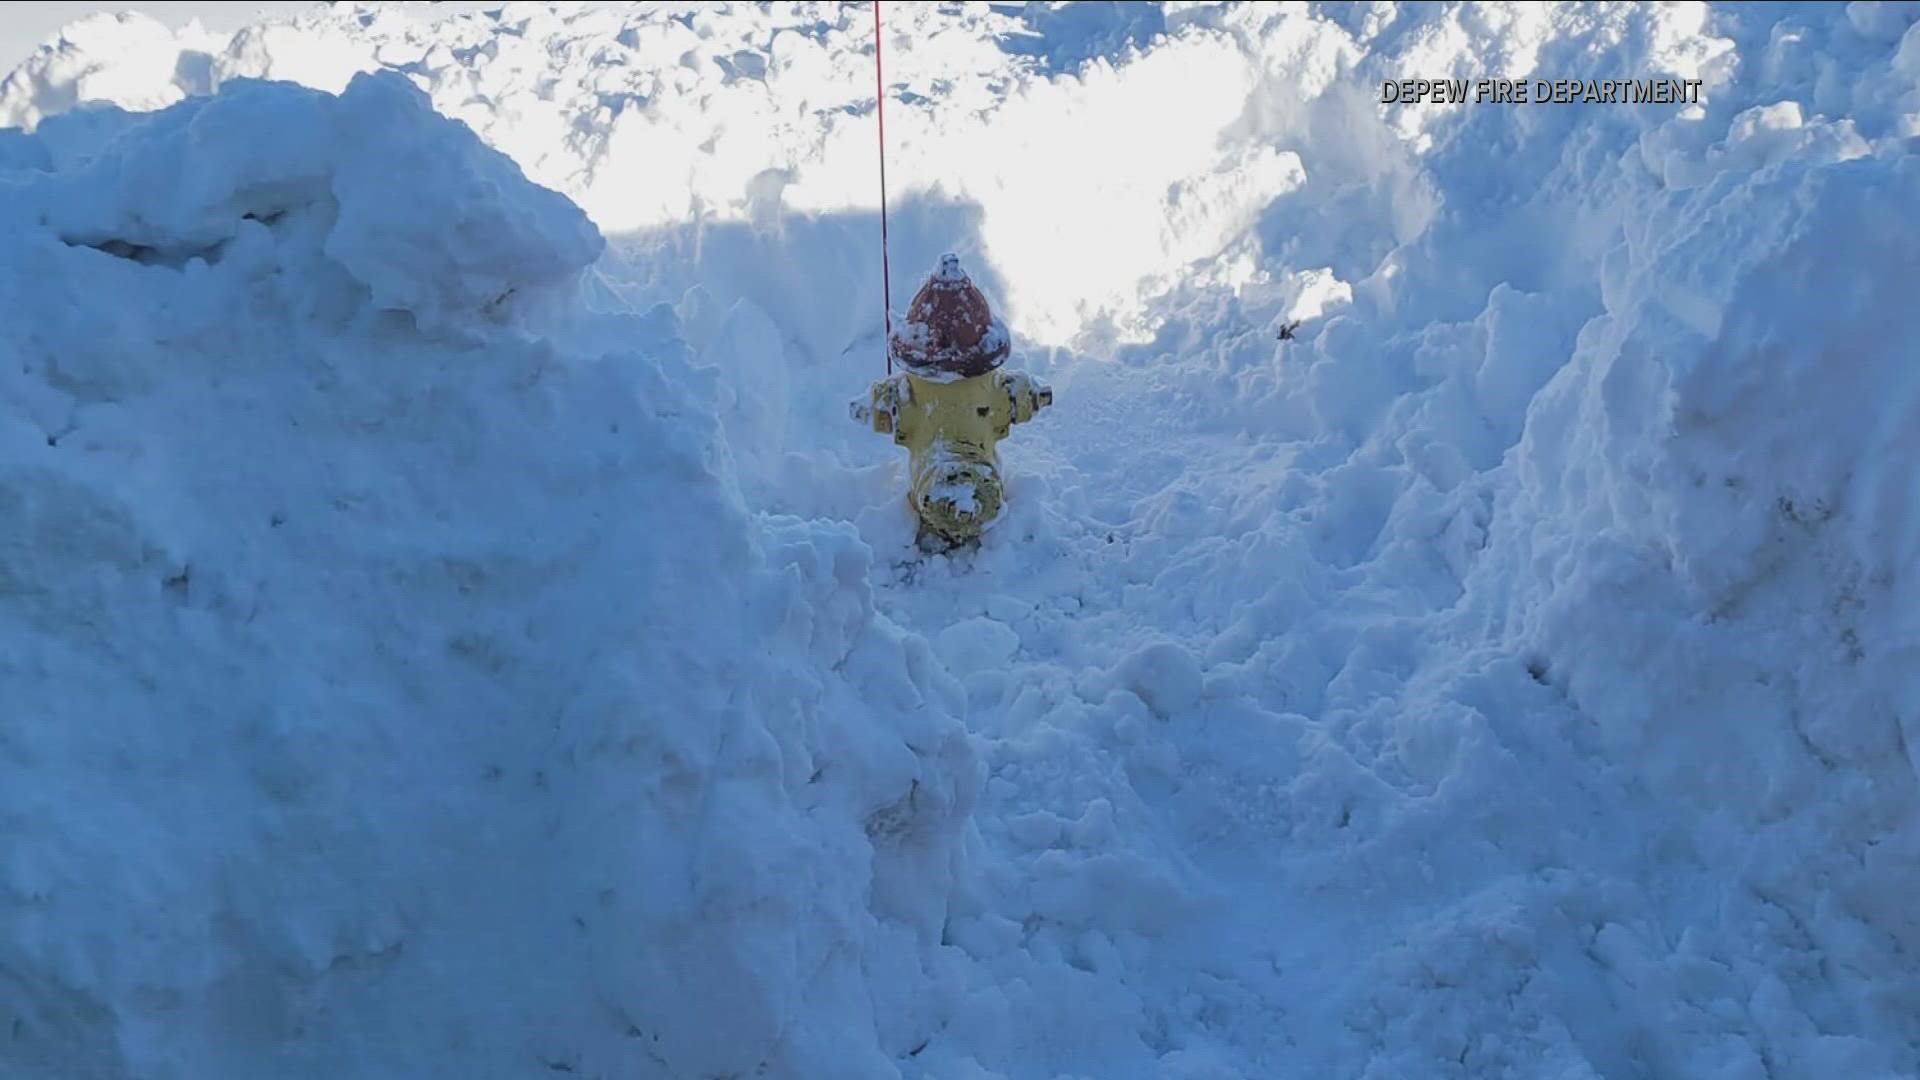 Clearing fire hydrants will help crews respond to emergency situations faster.